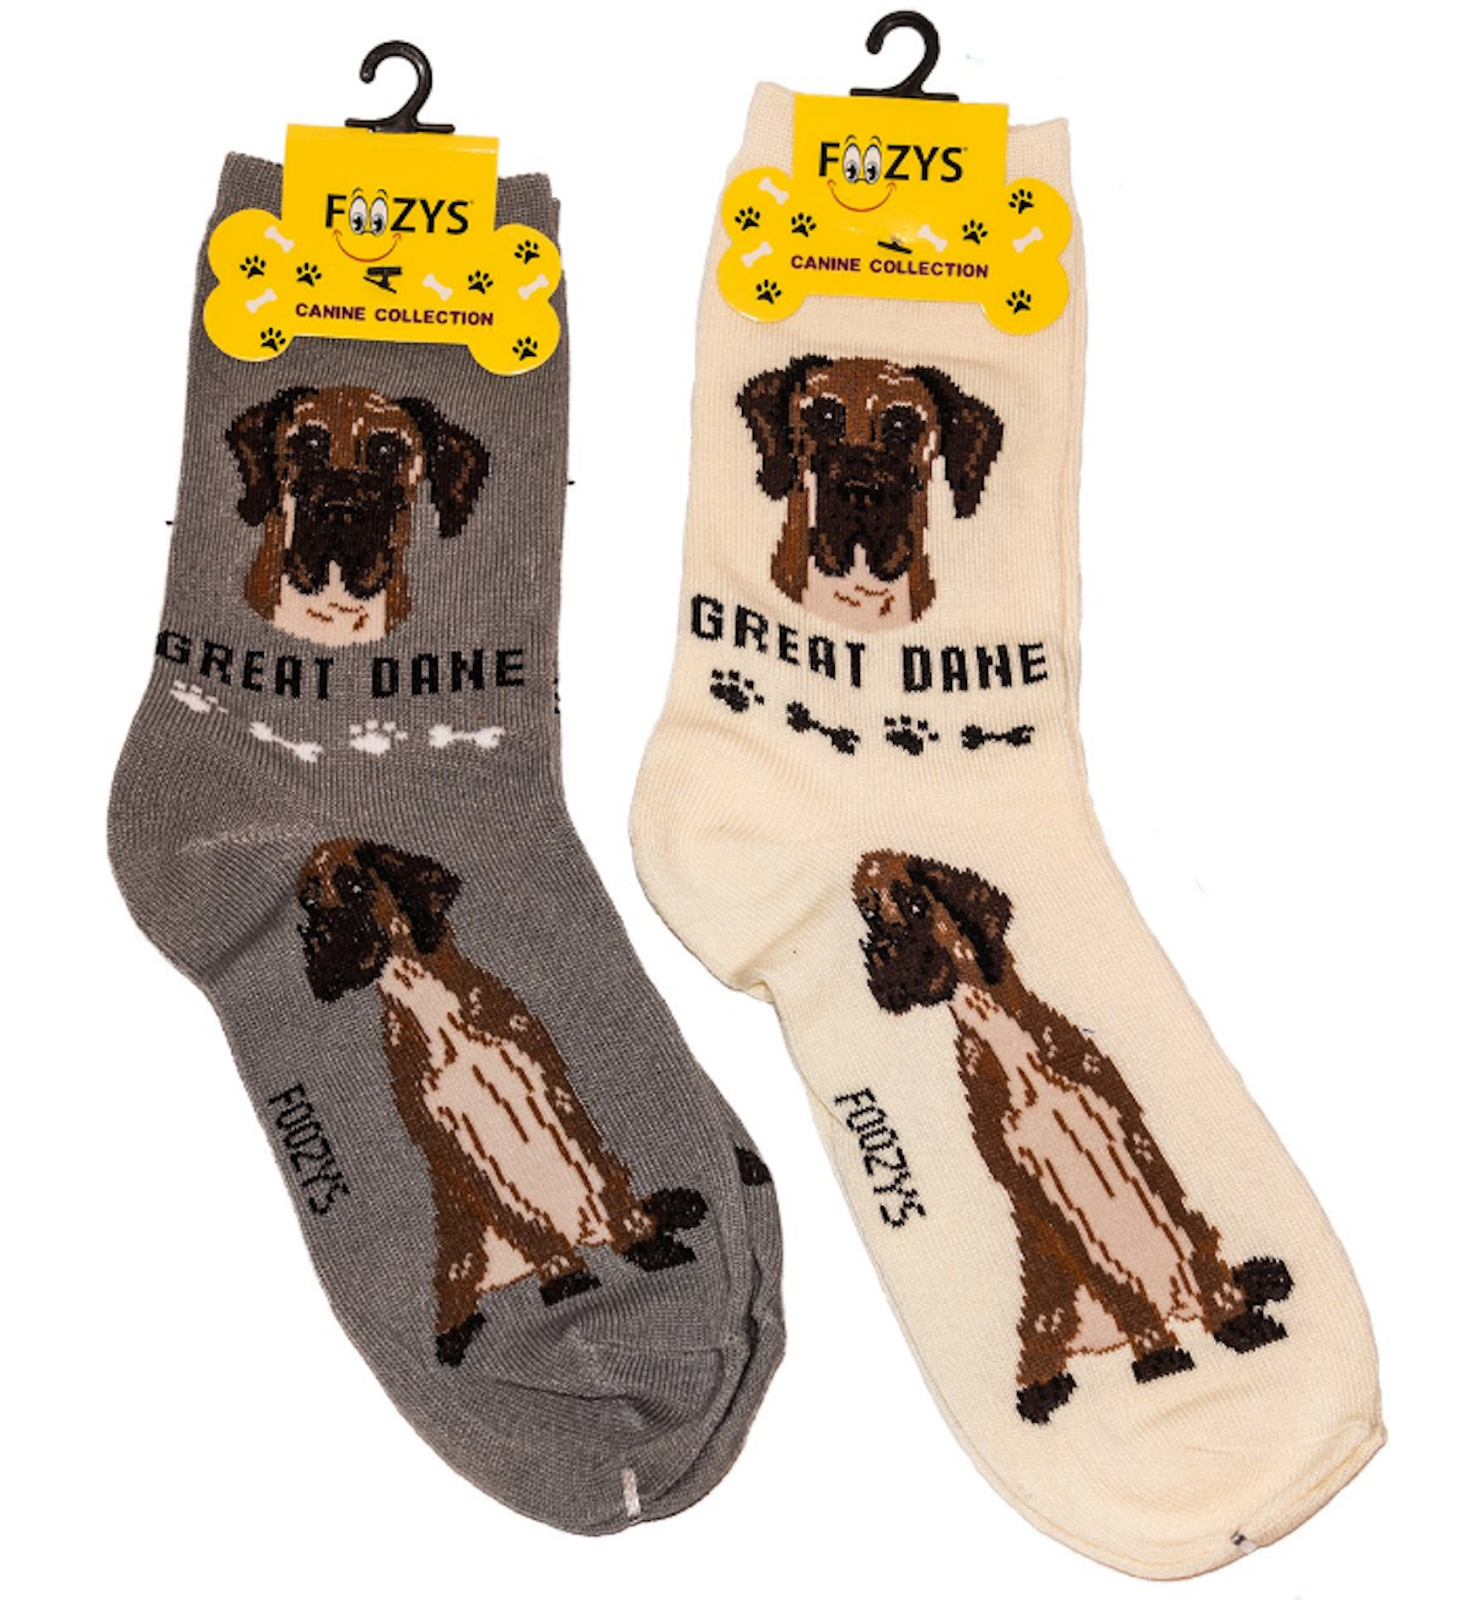 Great Dane Giant Dog Socks 2 Pairs Women's Foozys Canine Puppy Large Big Breed